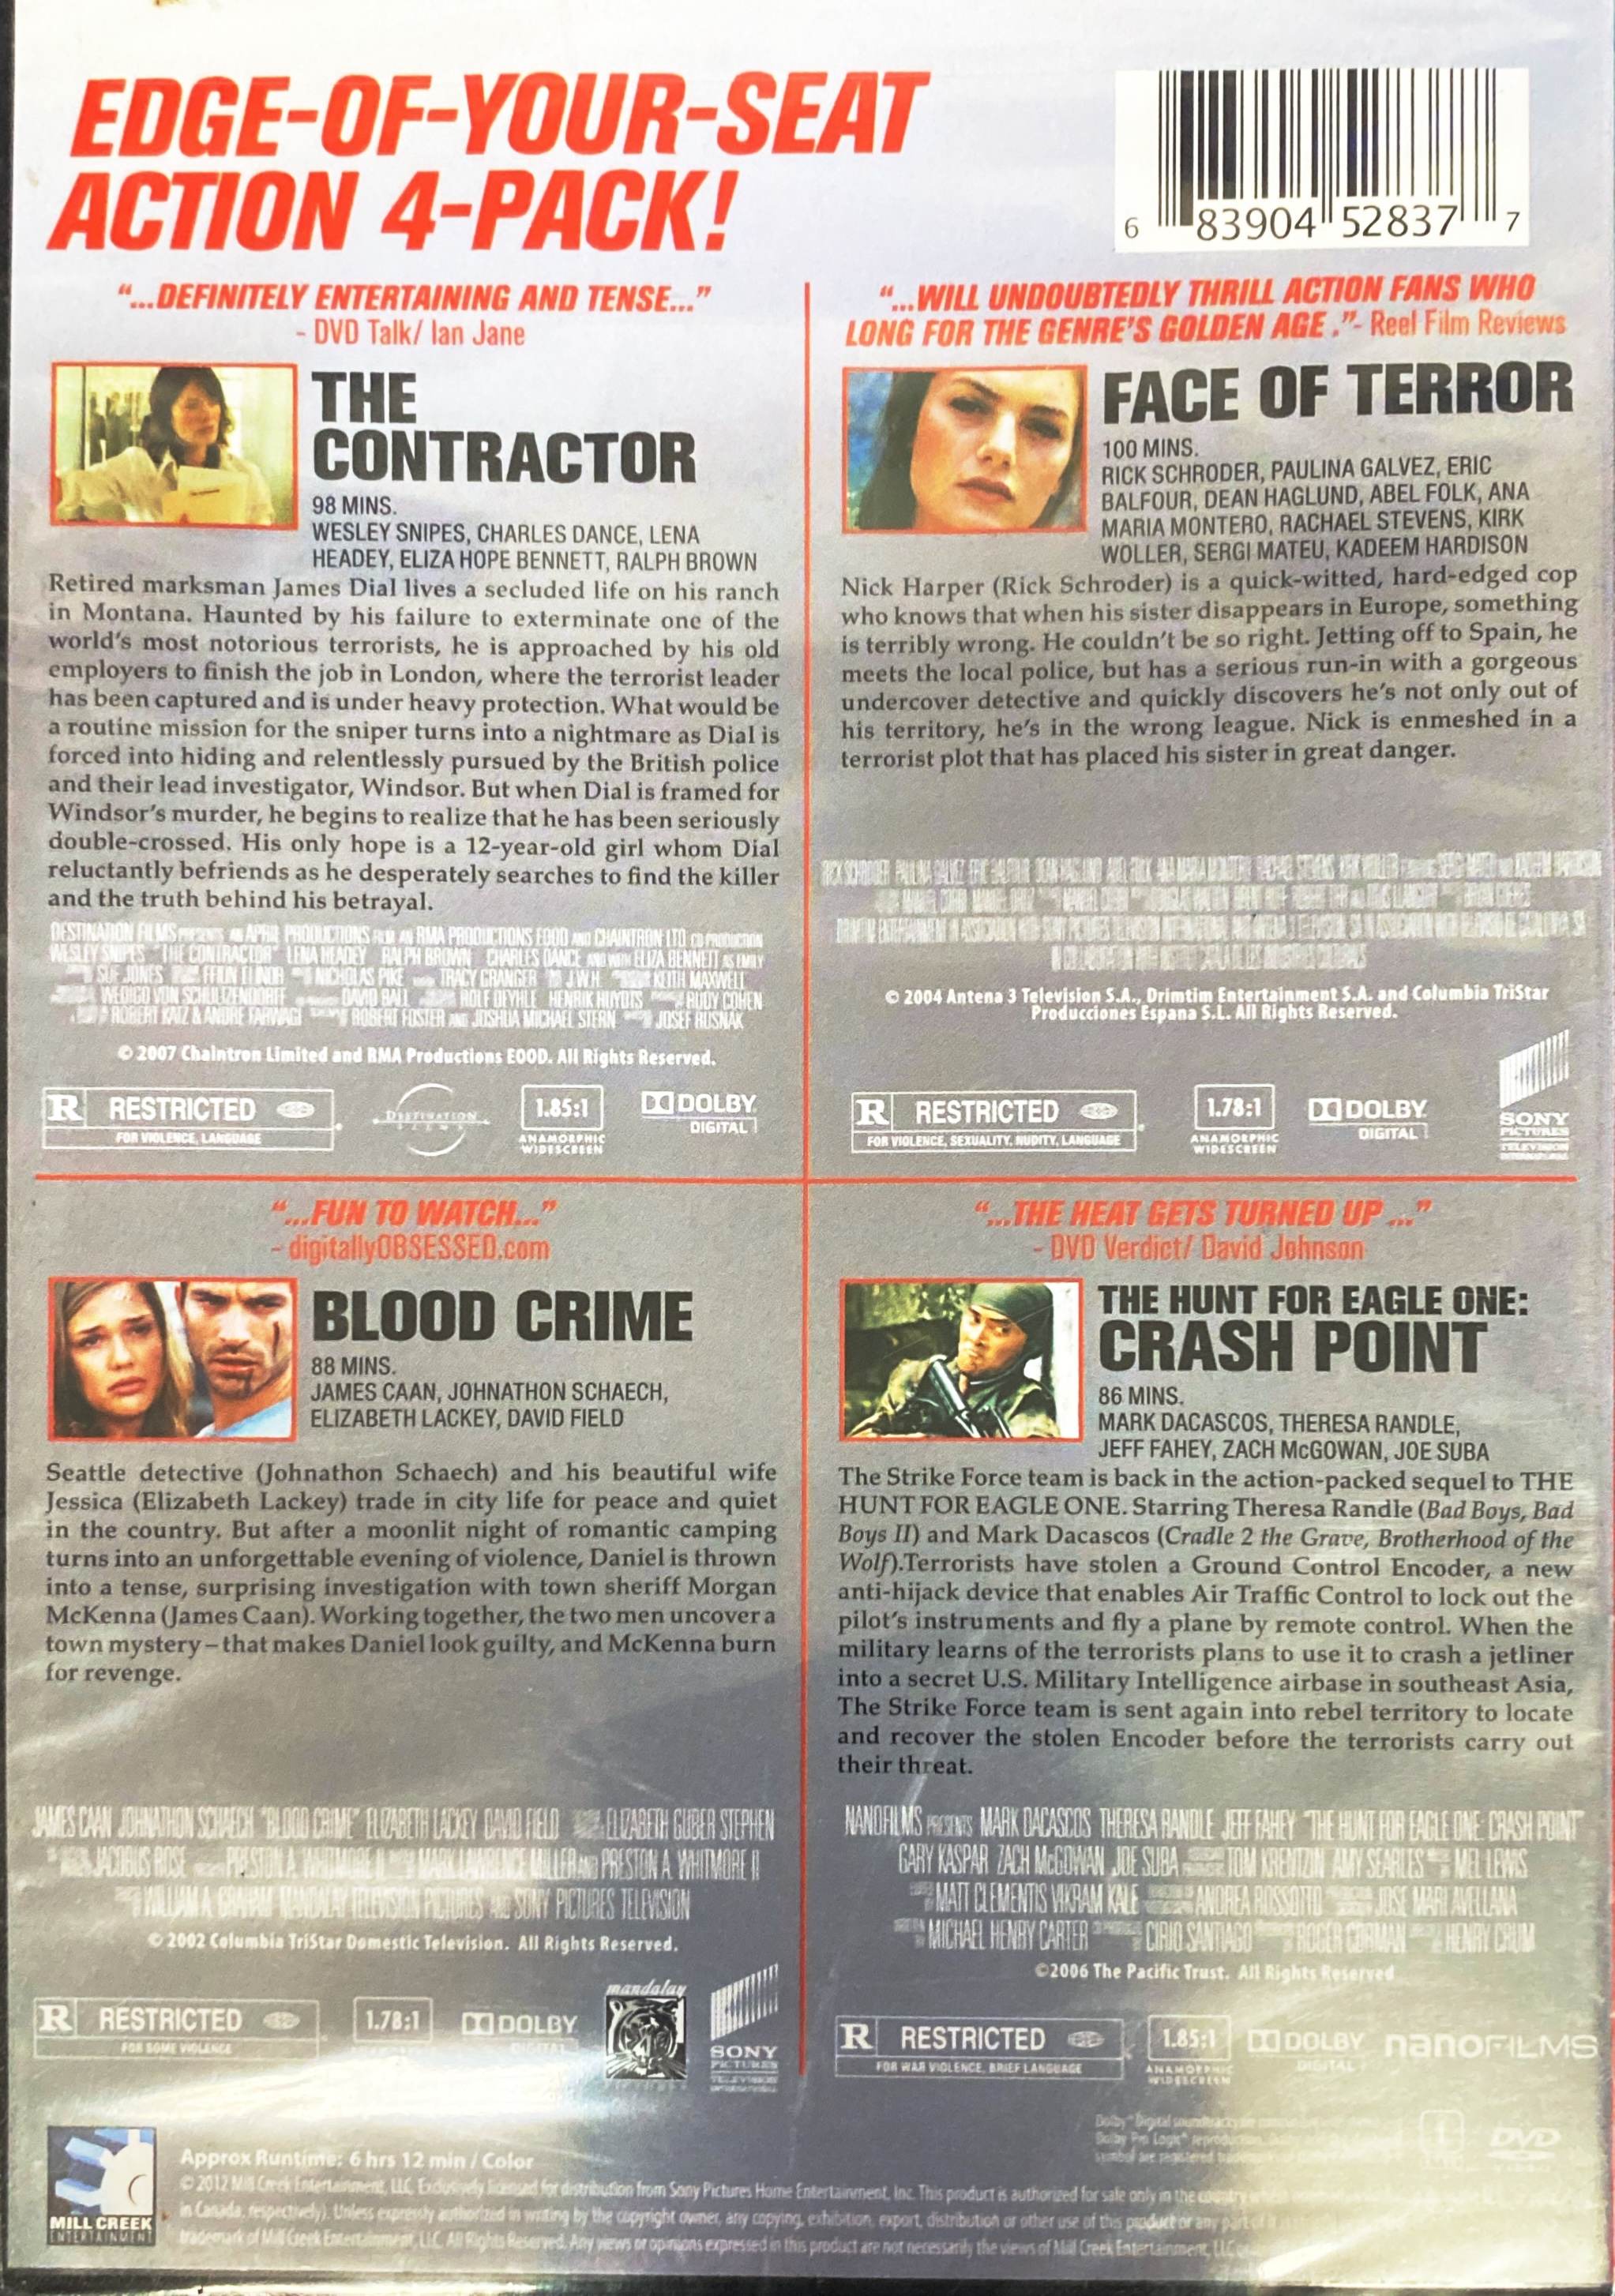 4 MOVIE-CONTRACTOR/FACE OF TER/BLOOD CRIME/HUNT FOR EAGLE ONE (DVD/2 DISC) (DVD) - image 2 of 2